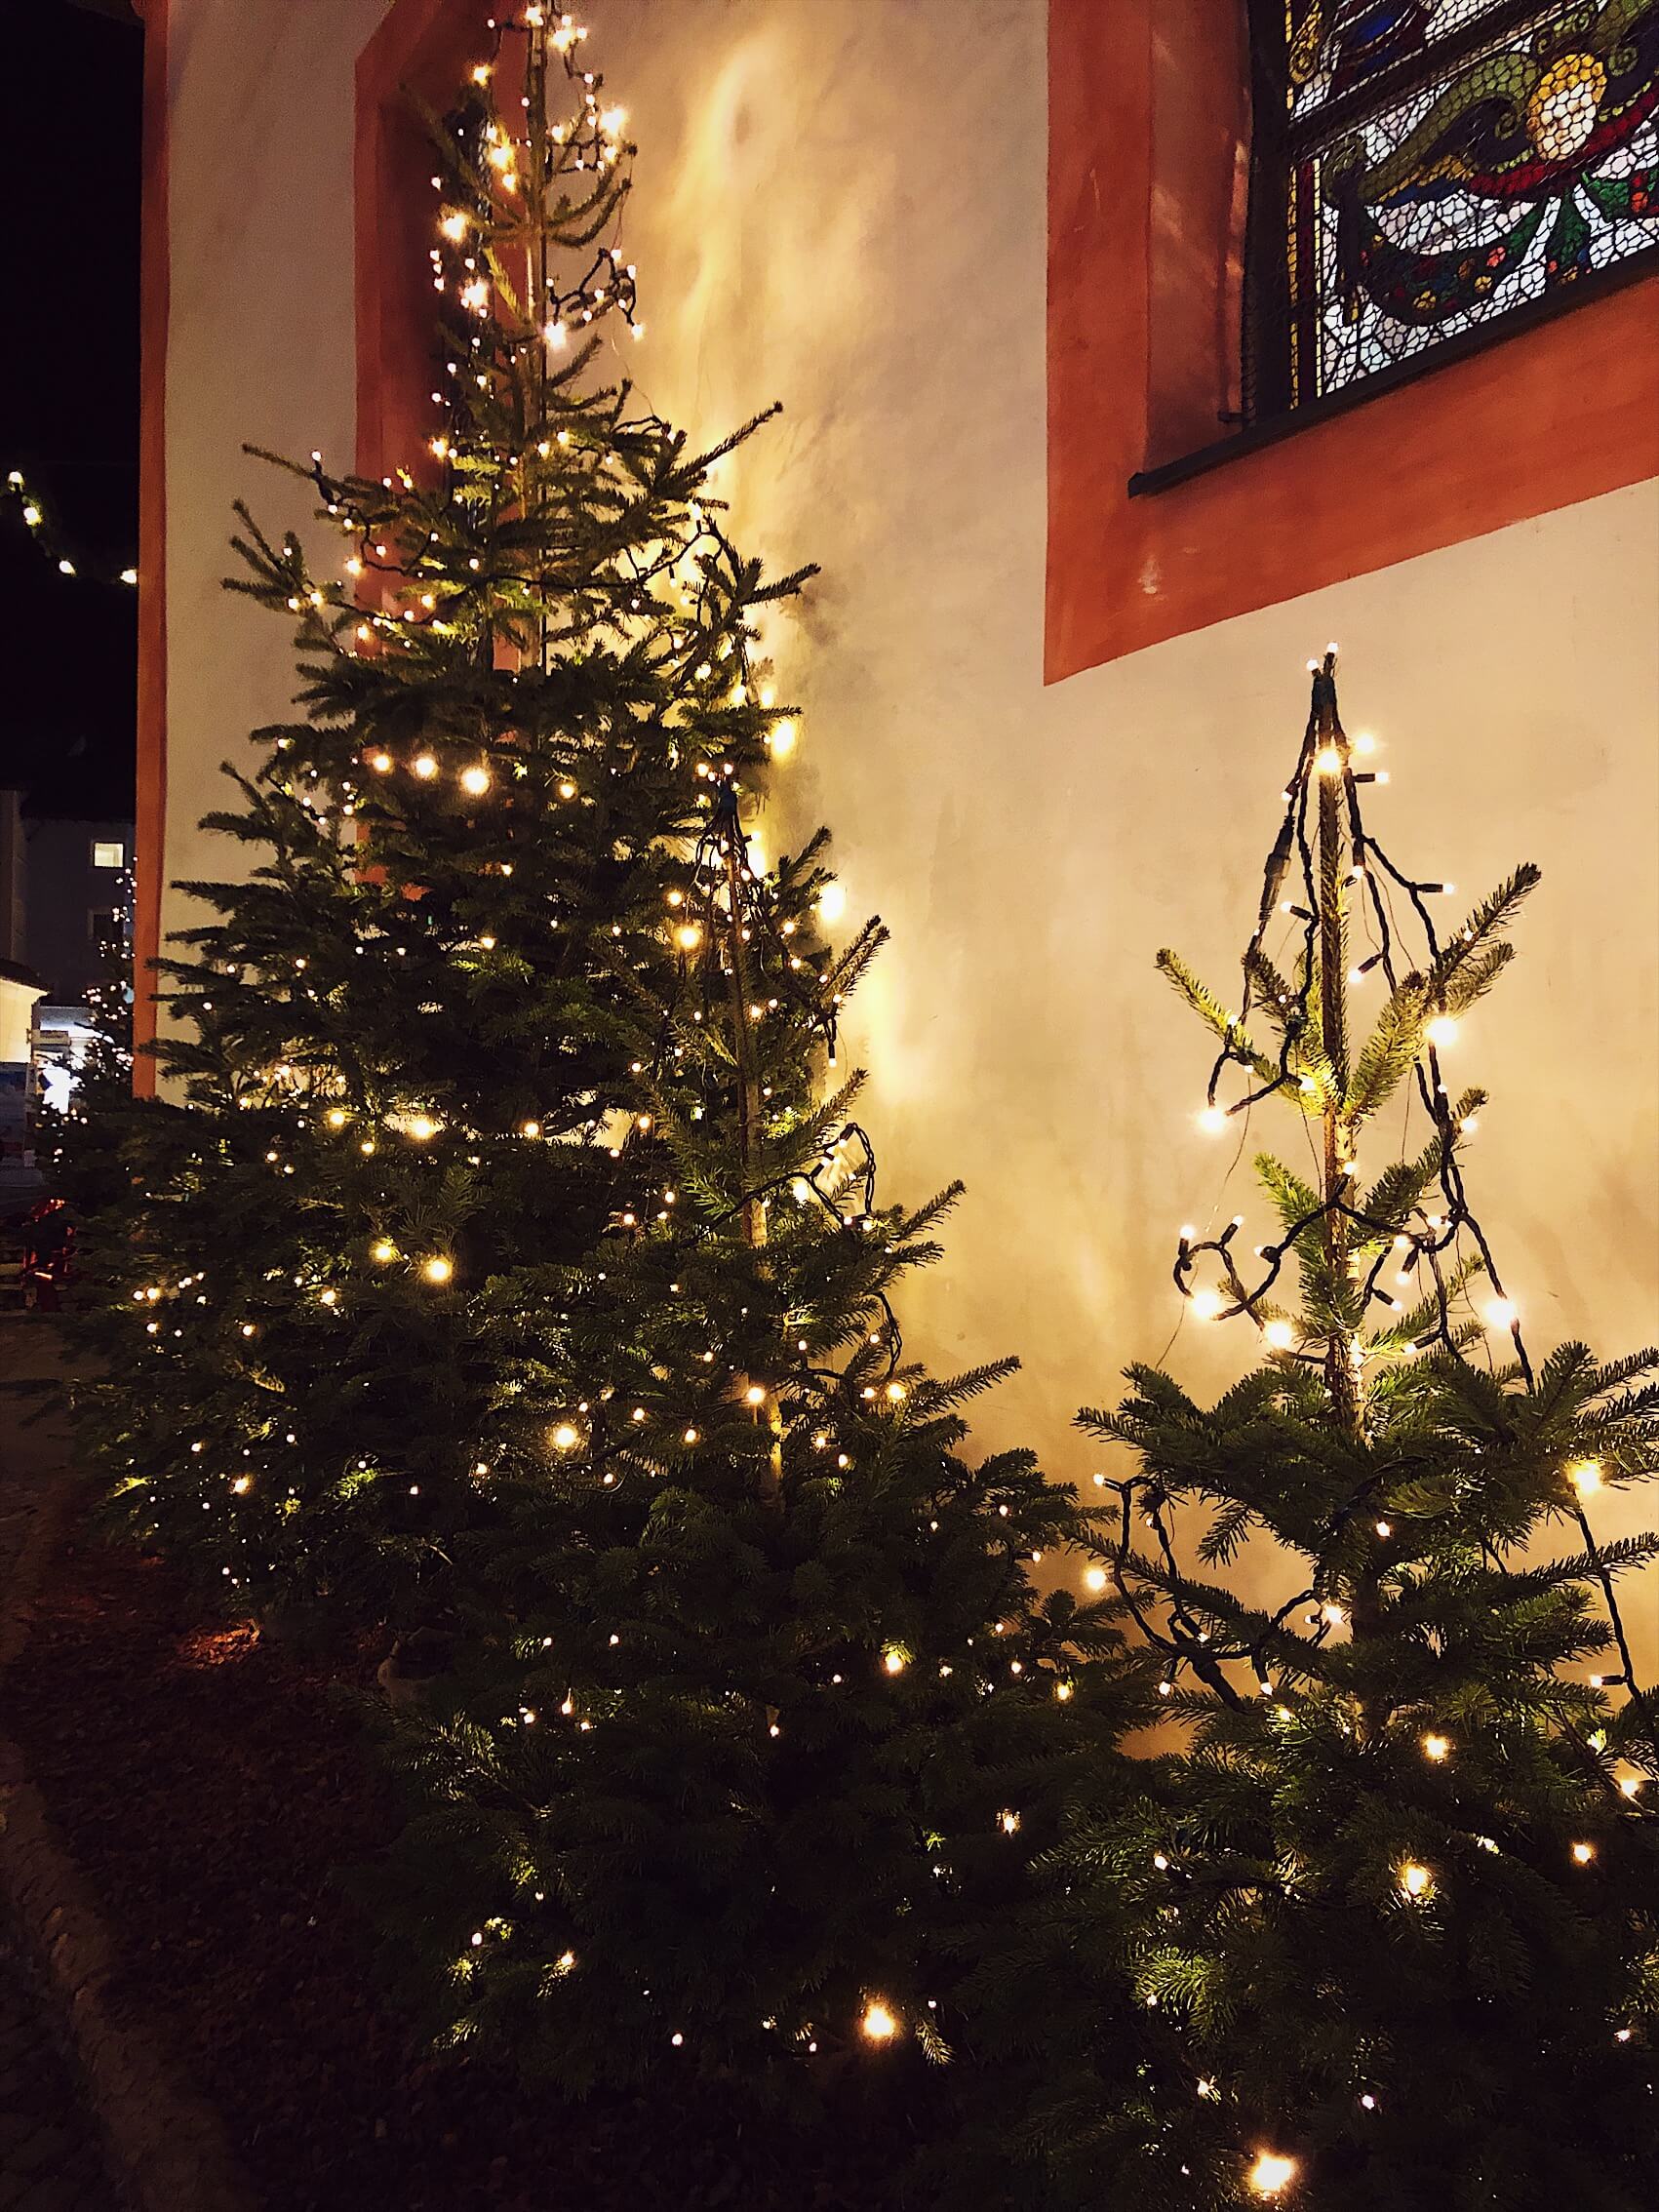 Christmas trees in the streets of Northern Italy